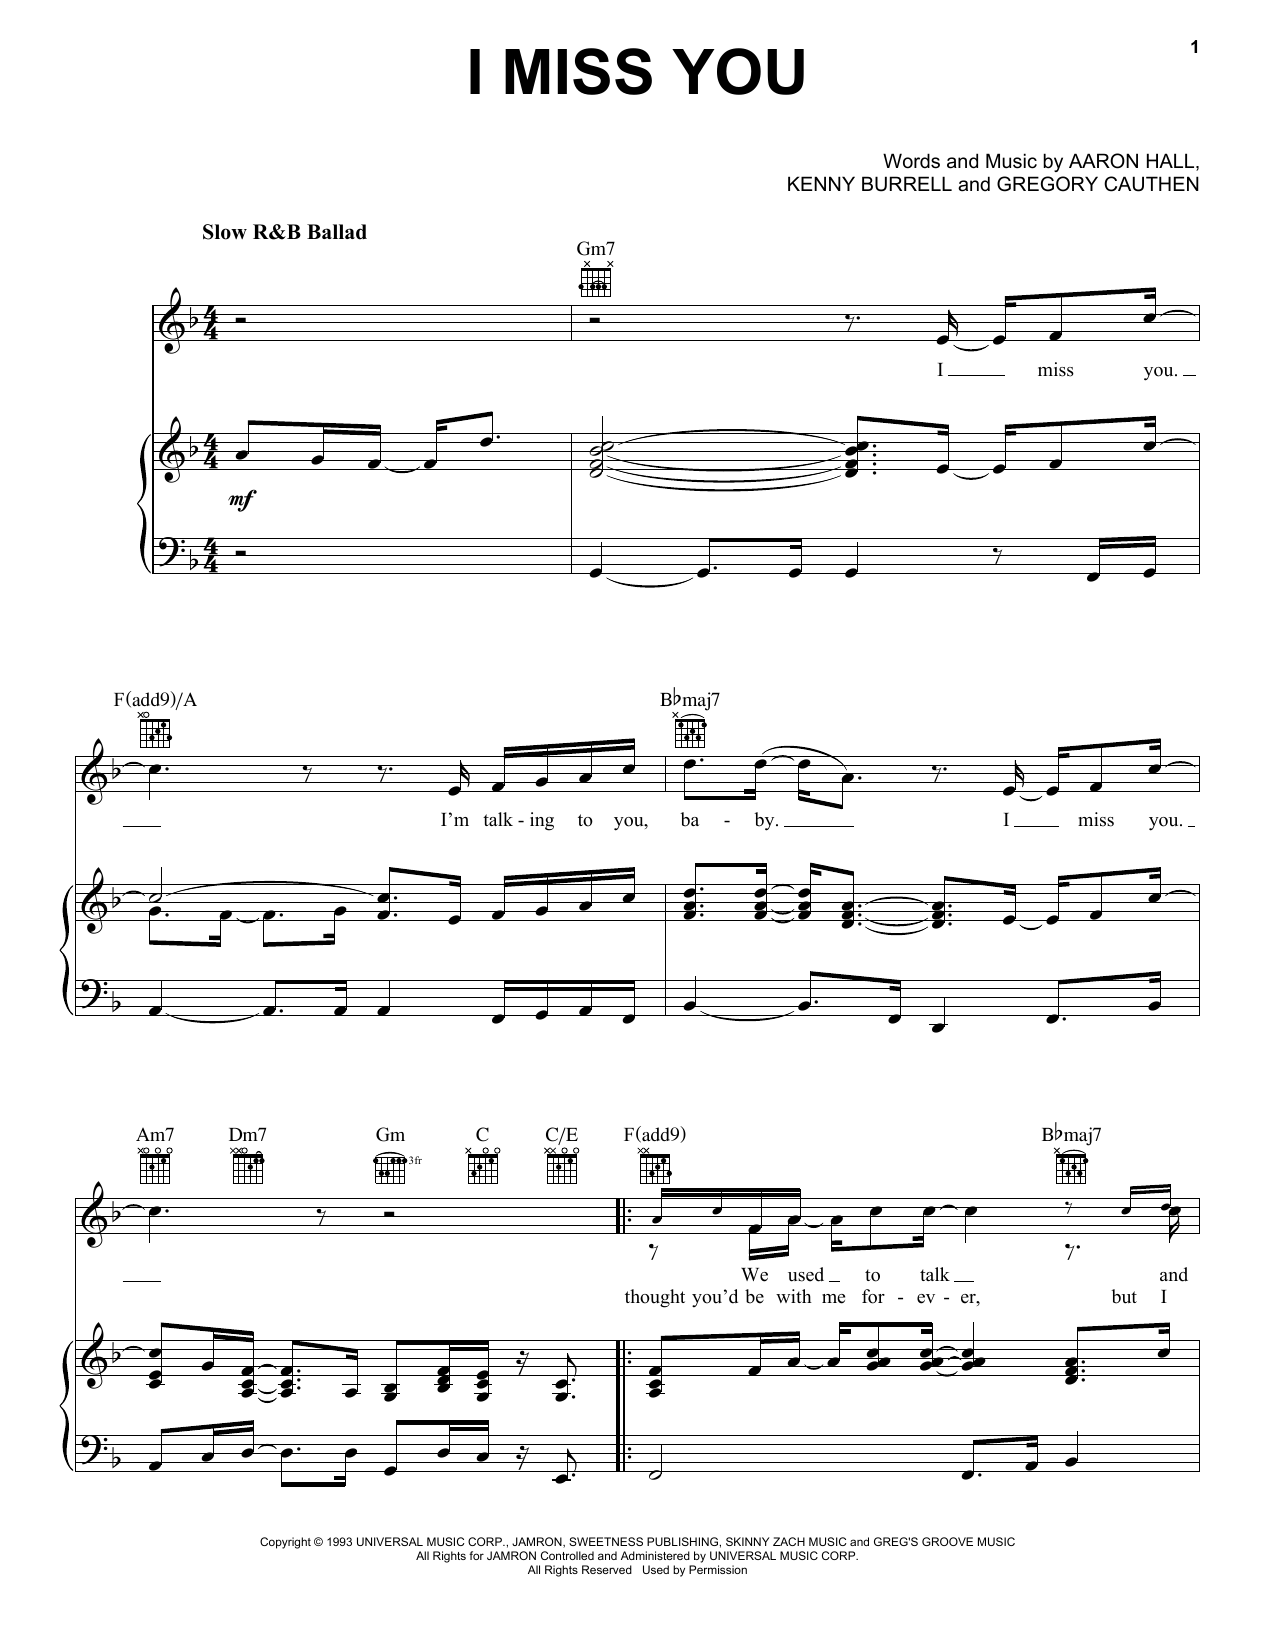 Aaron Hall I Miss You sheet music notes printable PDF score